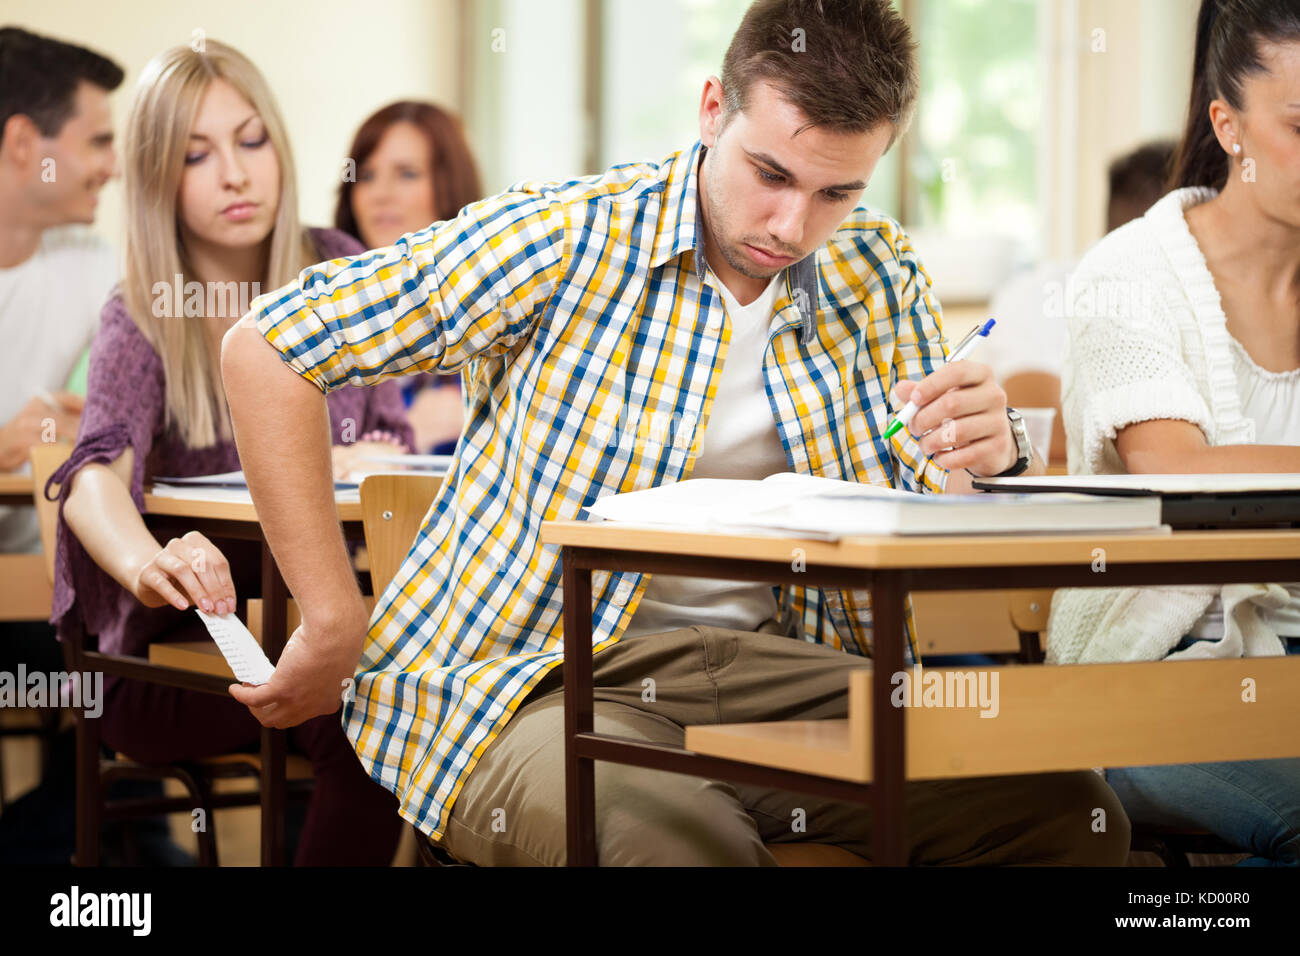 Students during test cheating with cheat sheet Stock Photo